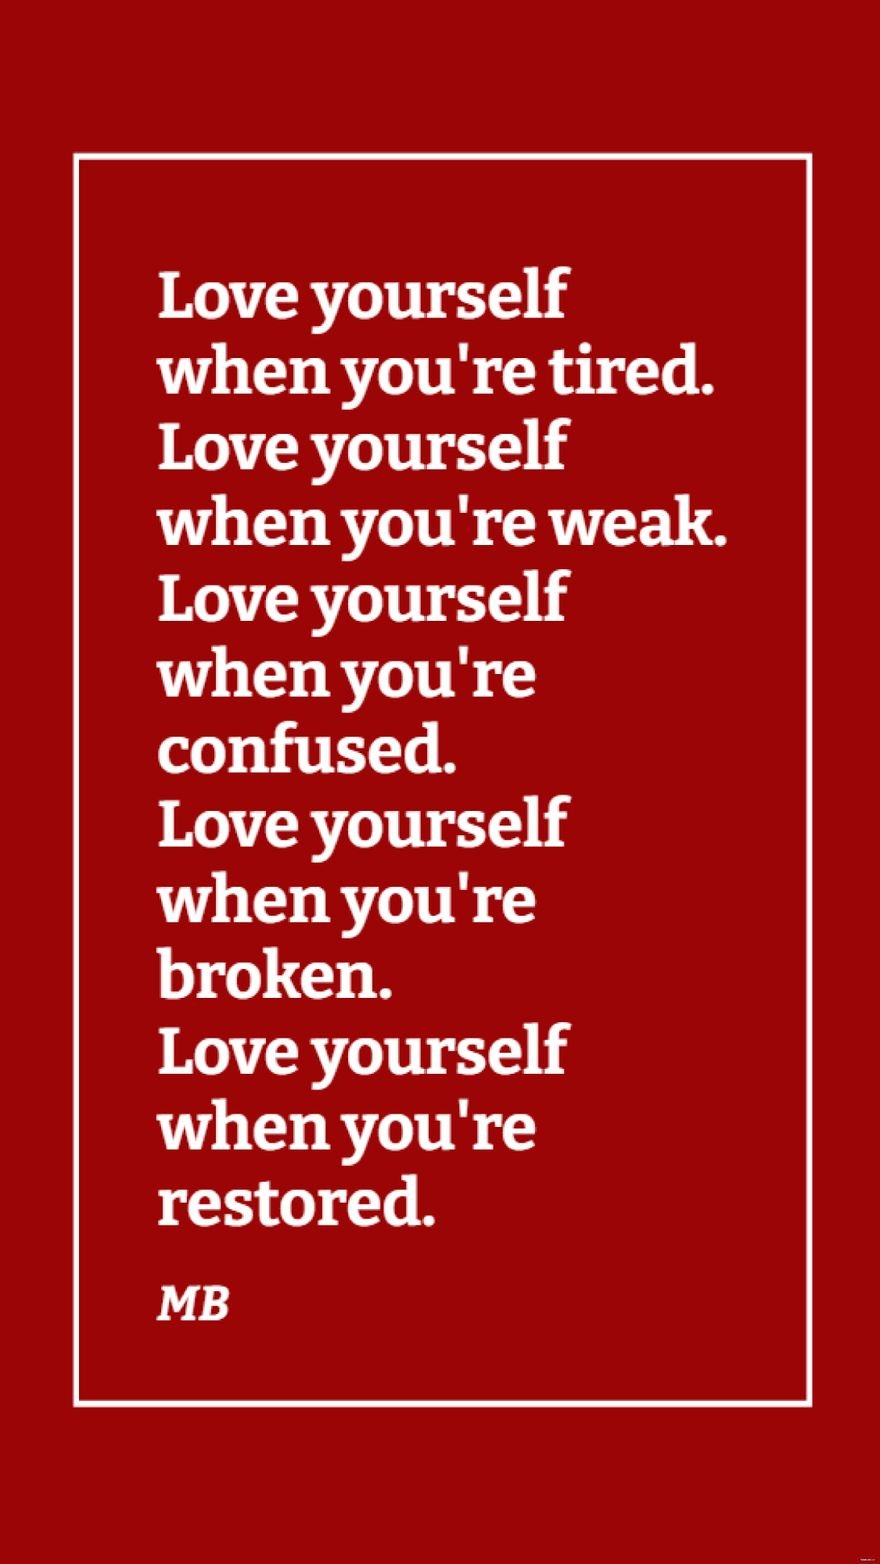 MB - Love yourself when you're tired. Love yourself when you're weak. Love yourself when you're confused. Love yourself when you're broken. Love yourself when you're restored.